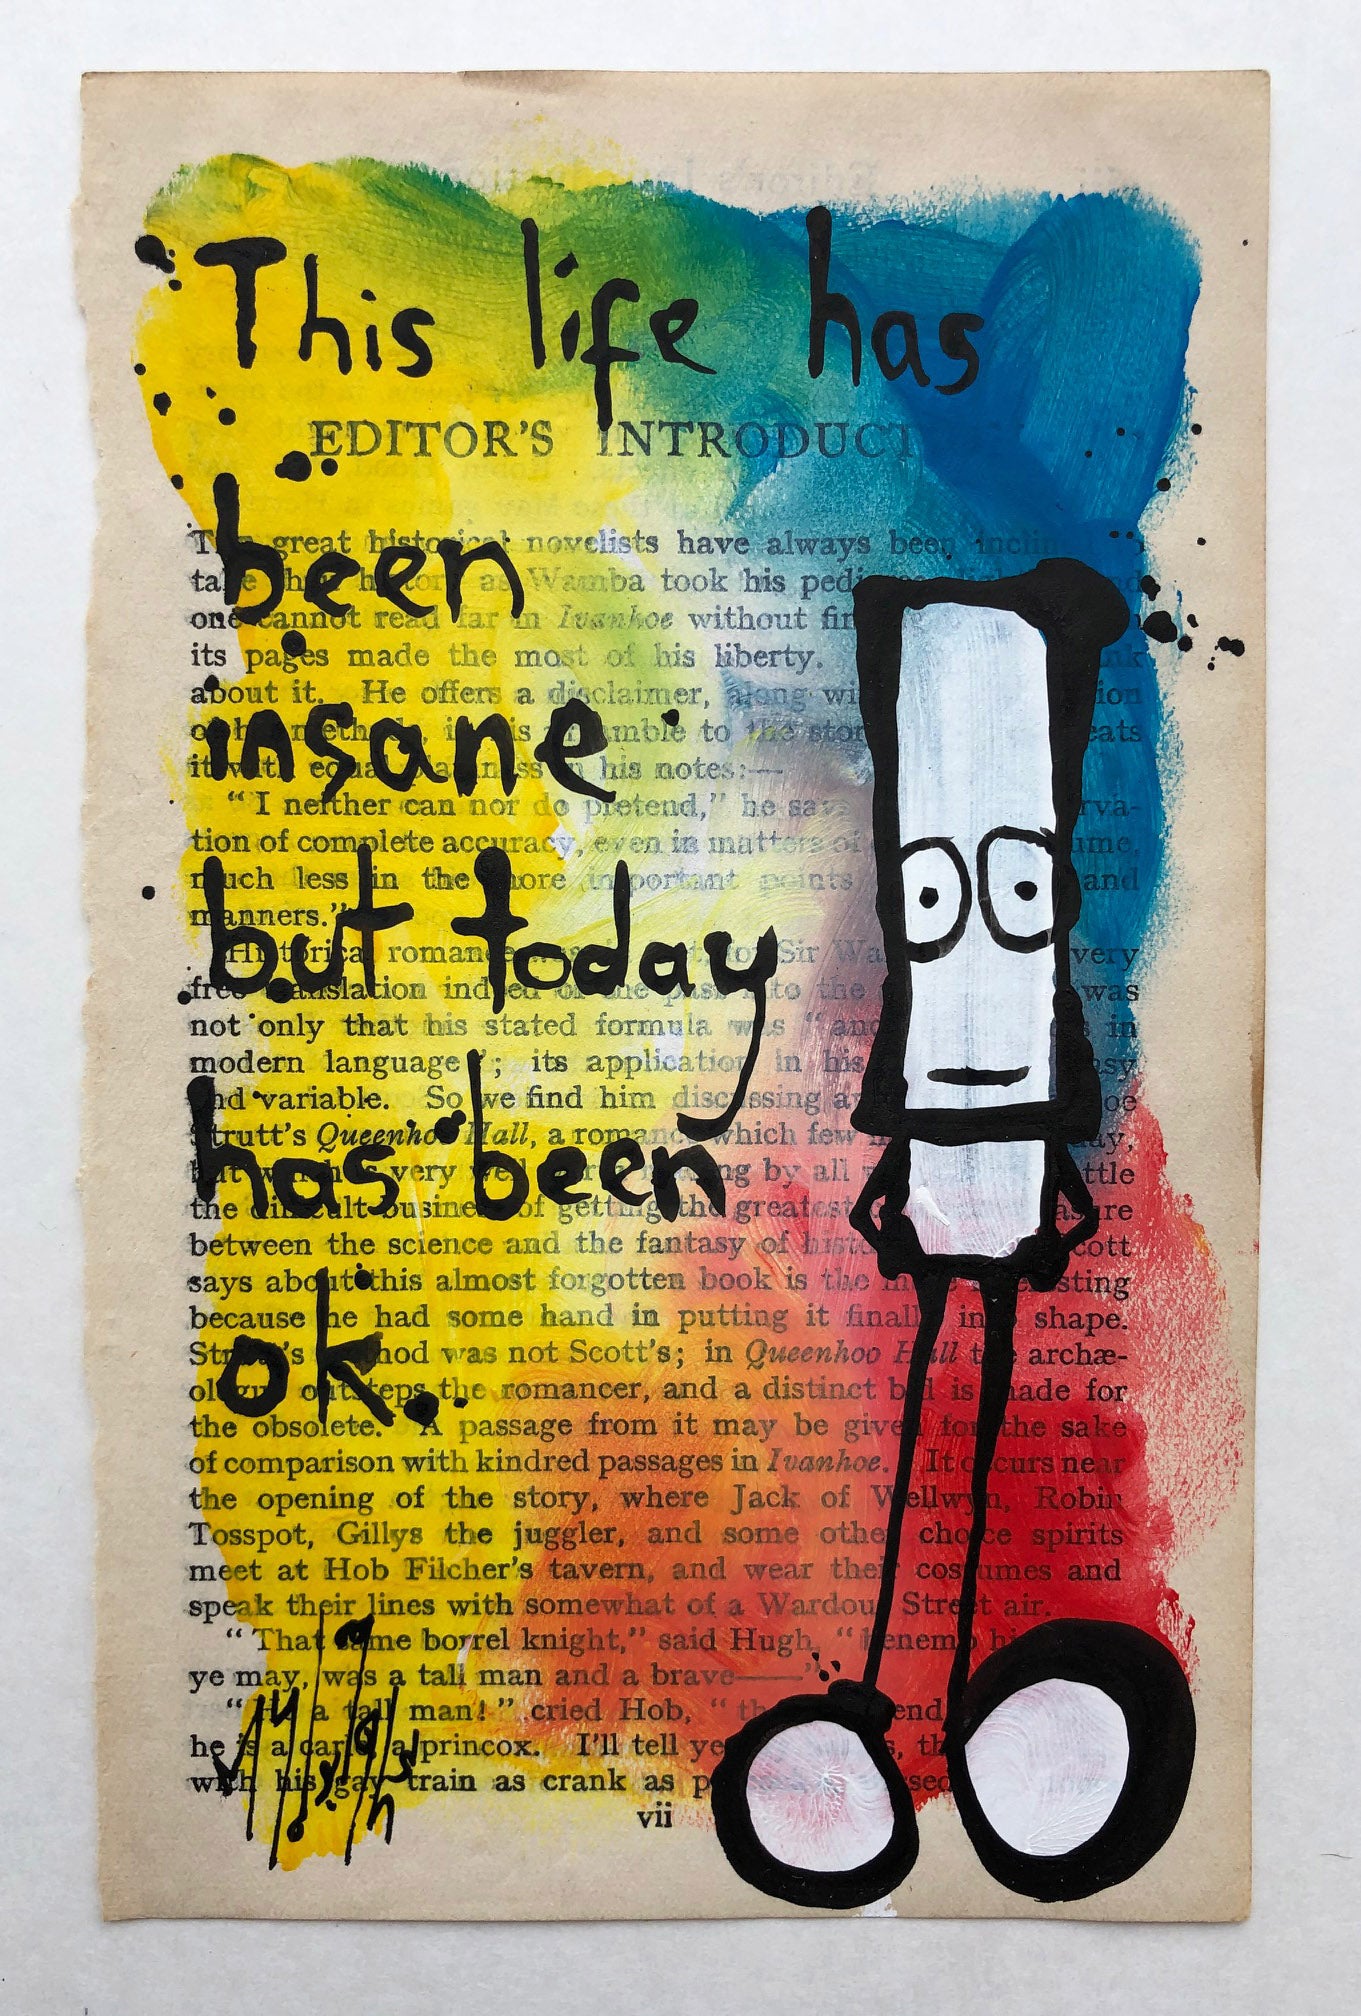 My Dog Sighs "This life has been insane but today has been ok"